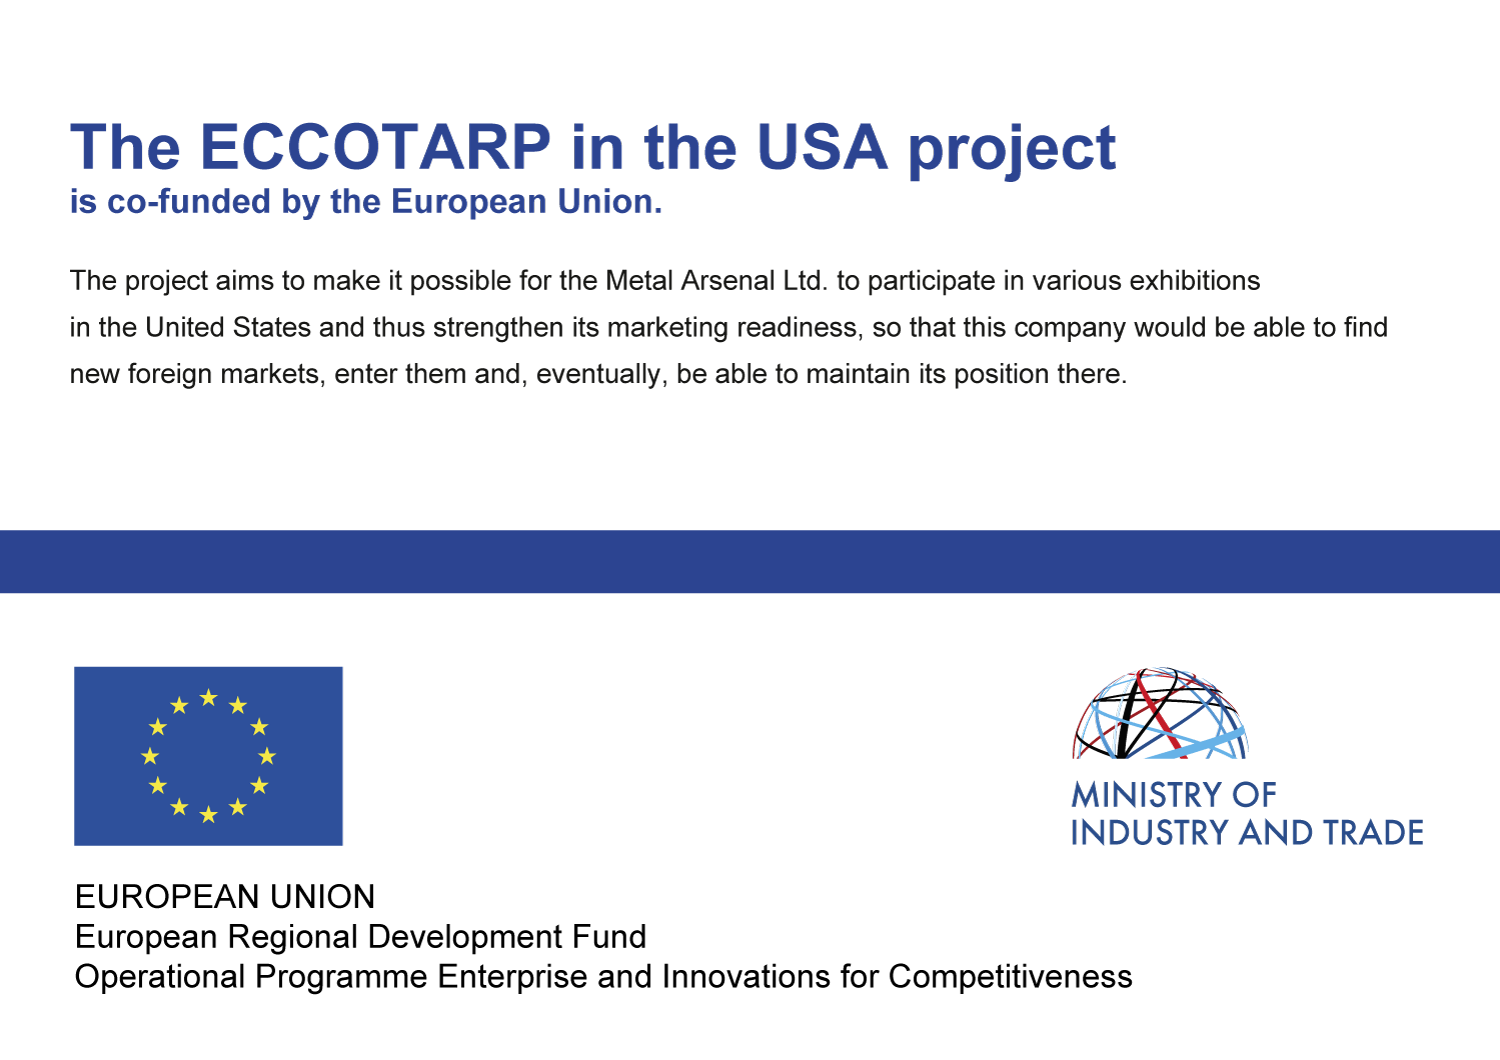 ECCOTARP in the USA is co-funded by the European Union